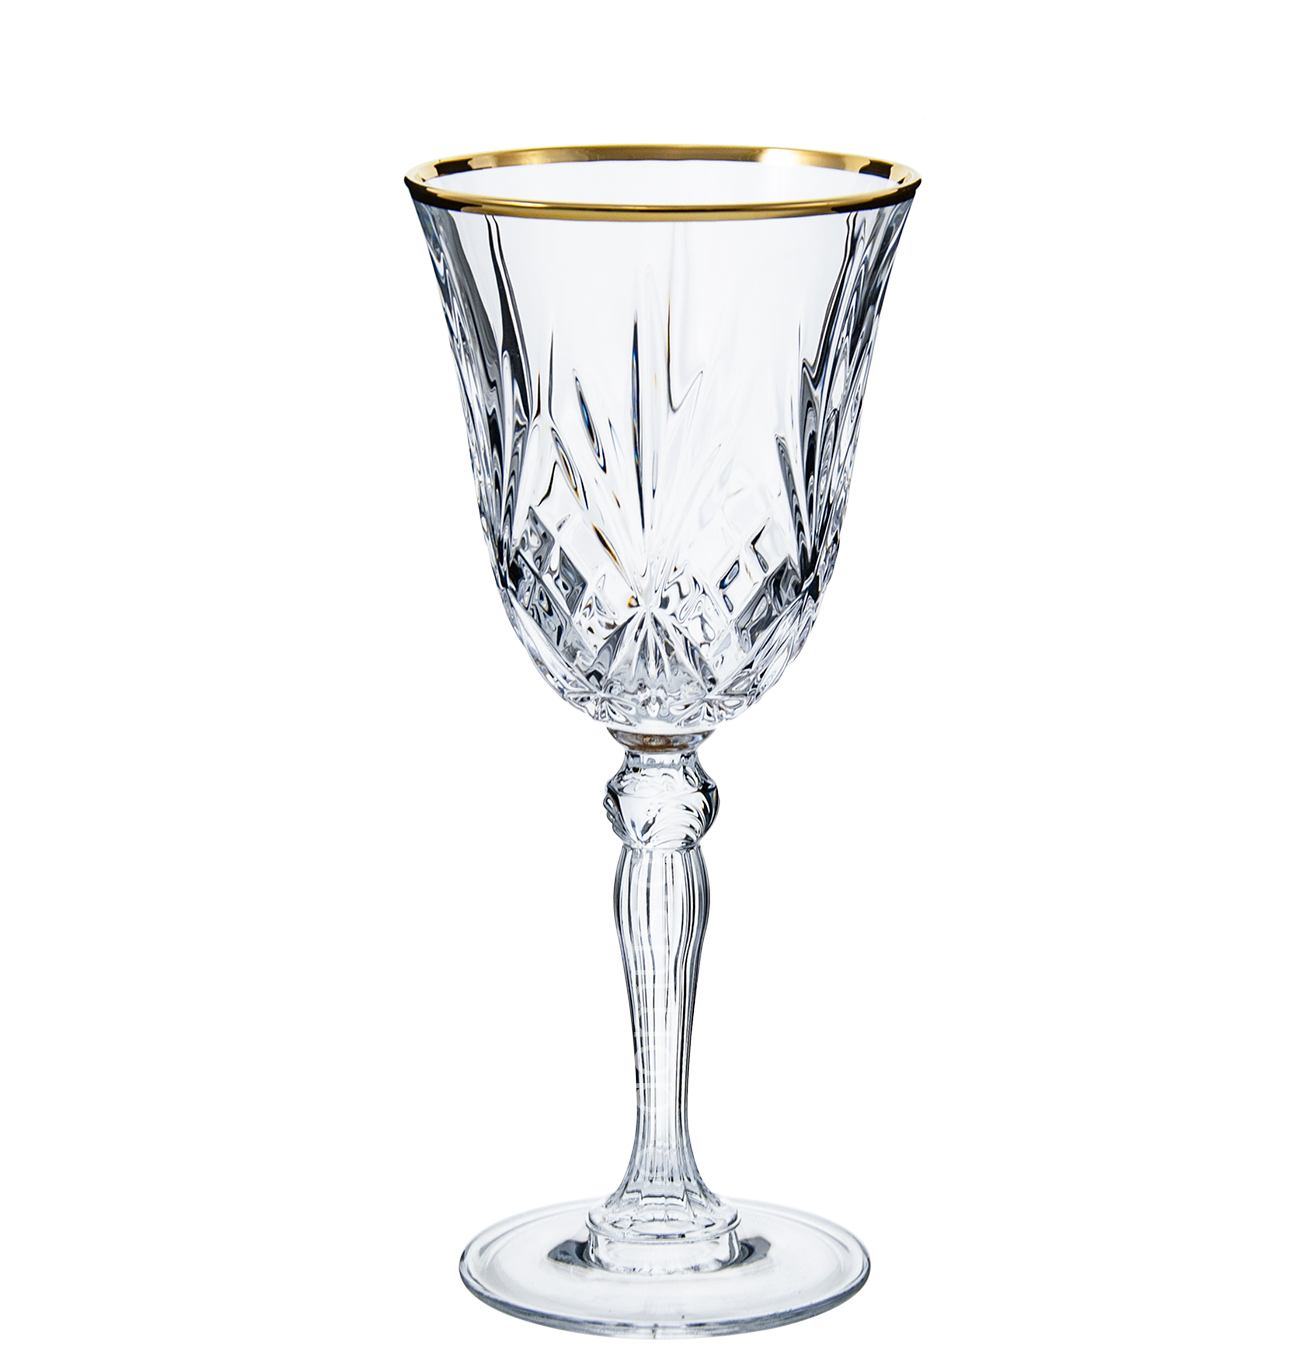 MELODIA GOLD Wine Glass 210ml LUXION PROFESSIONAL RCR ITALY